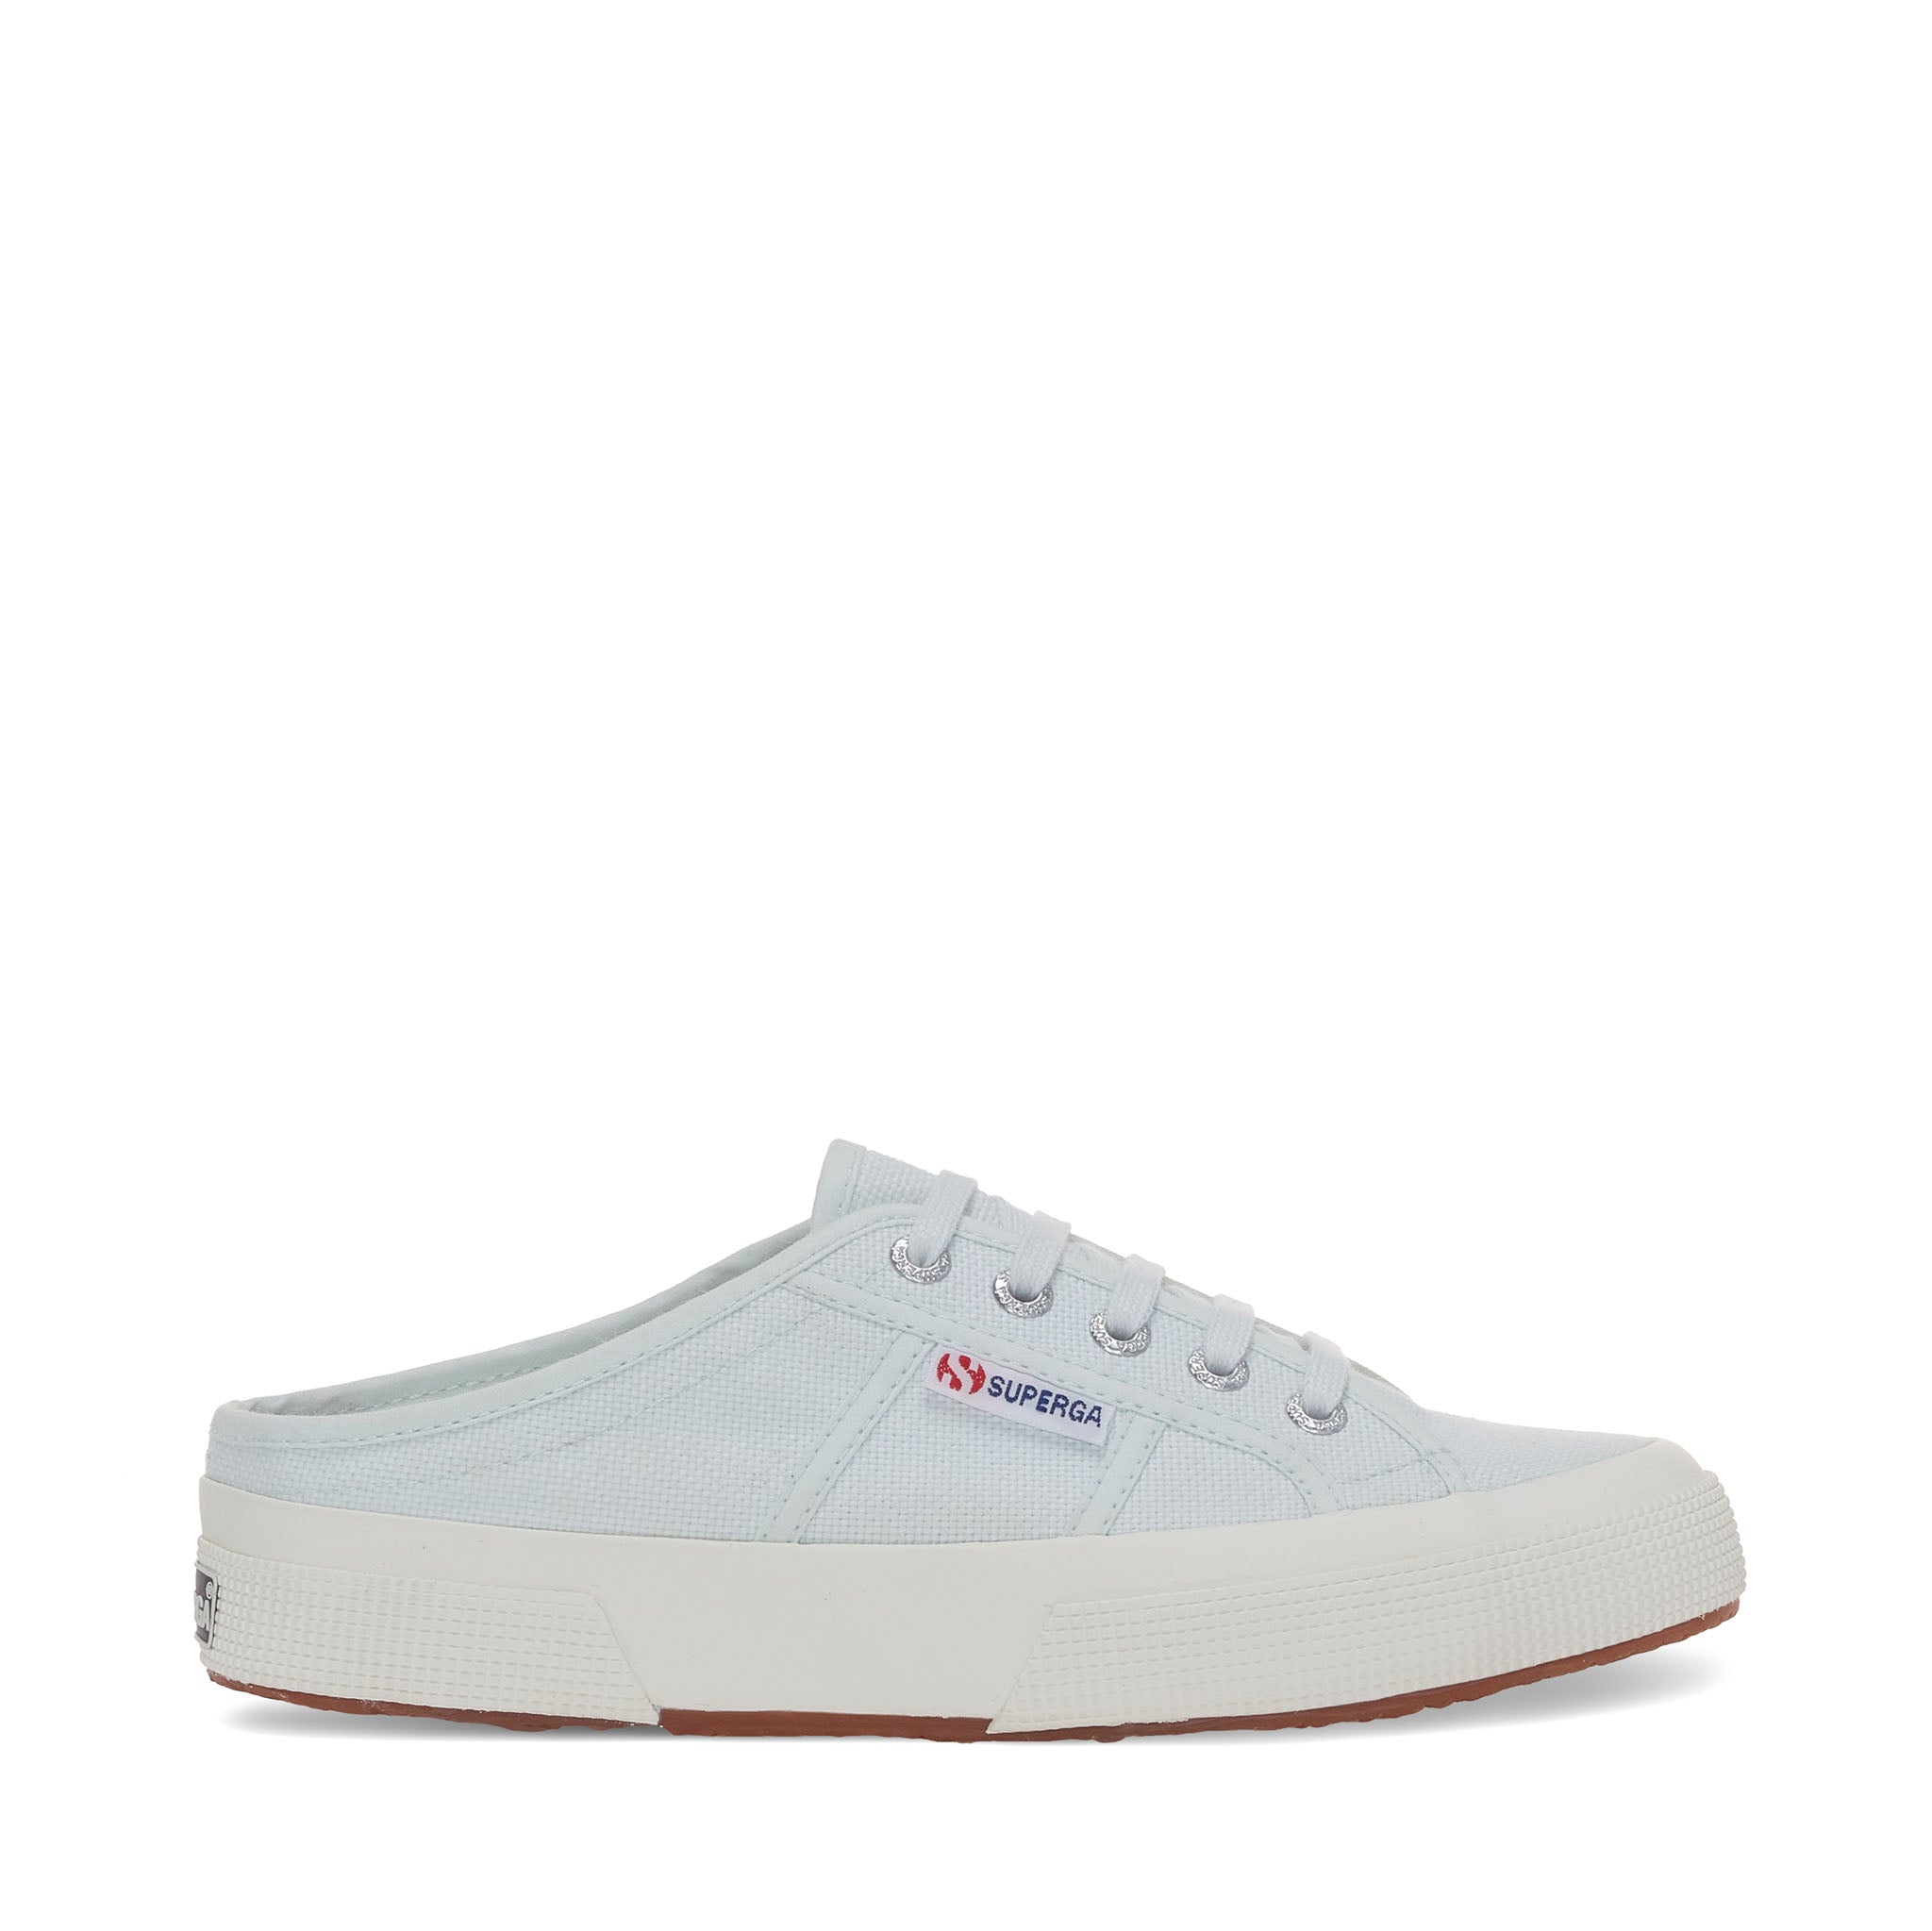 Superga 2402 Mule Sneakers - Light Blue. Side view.